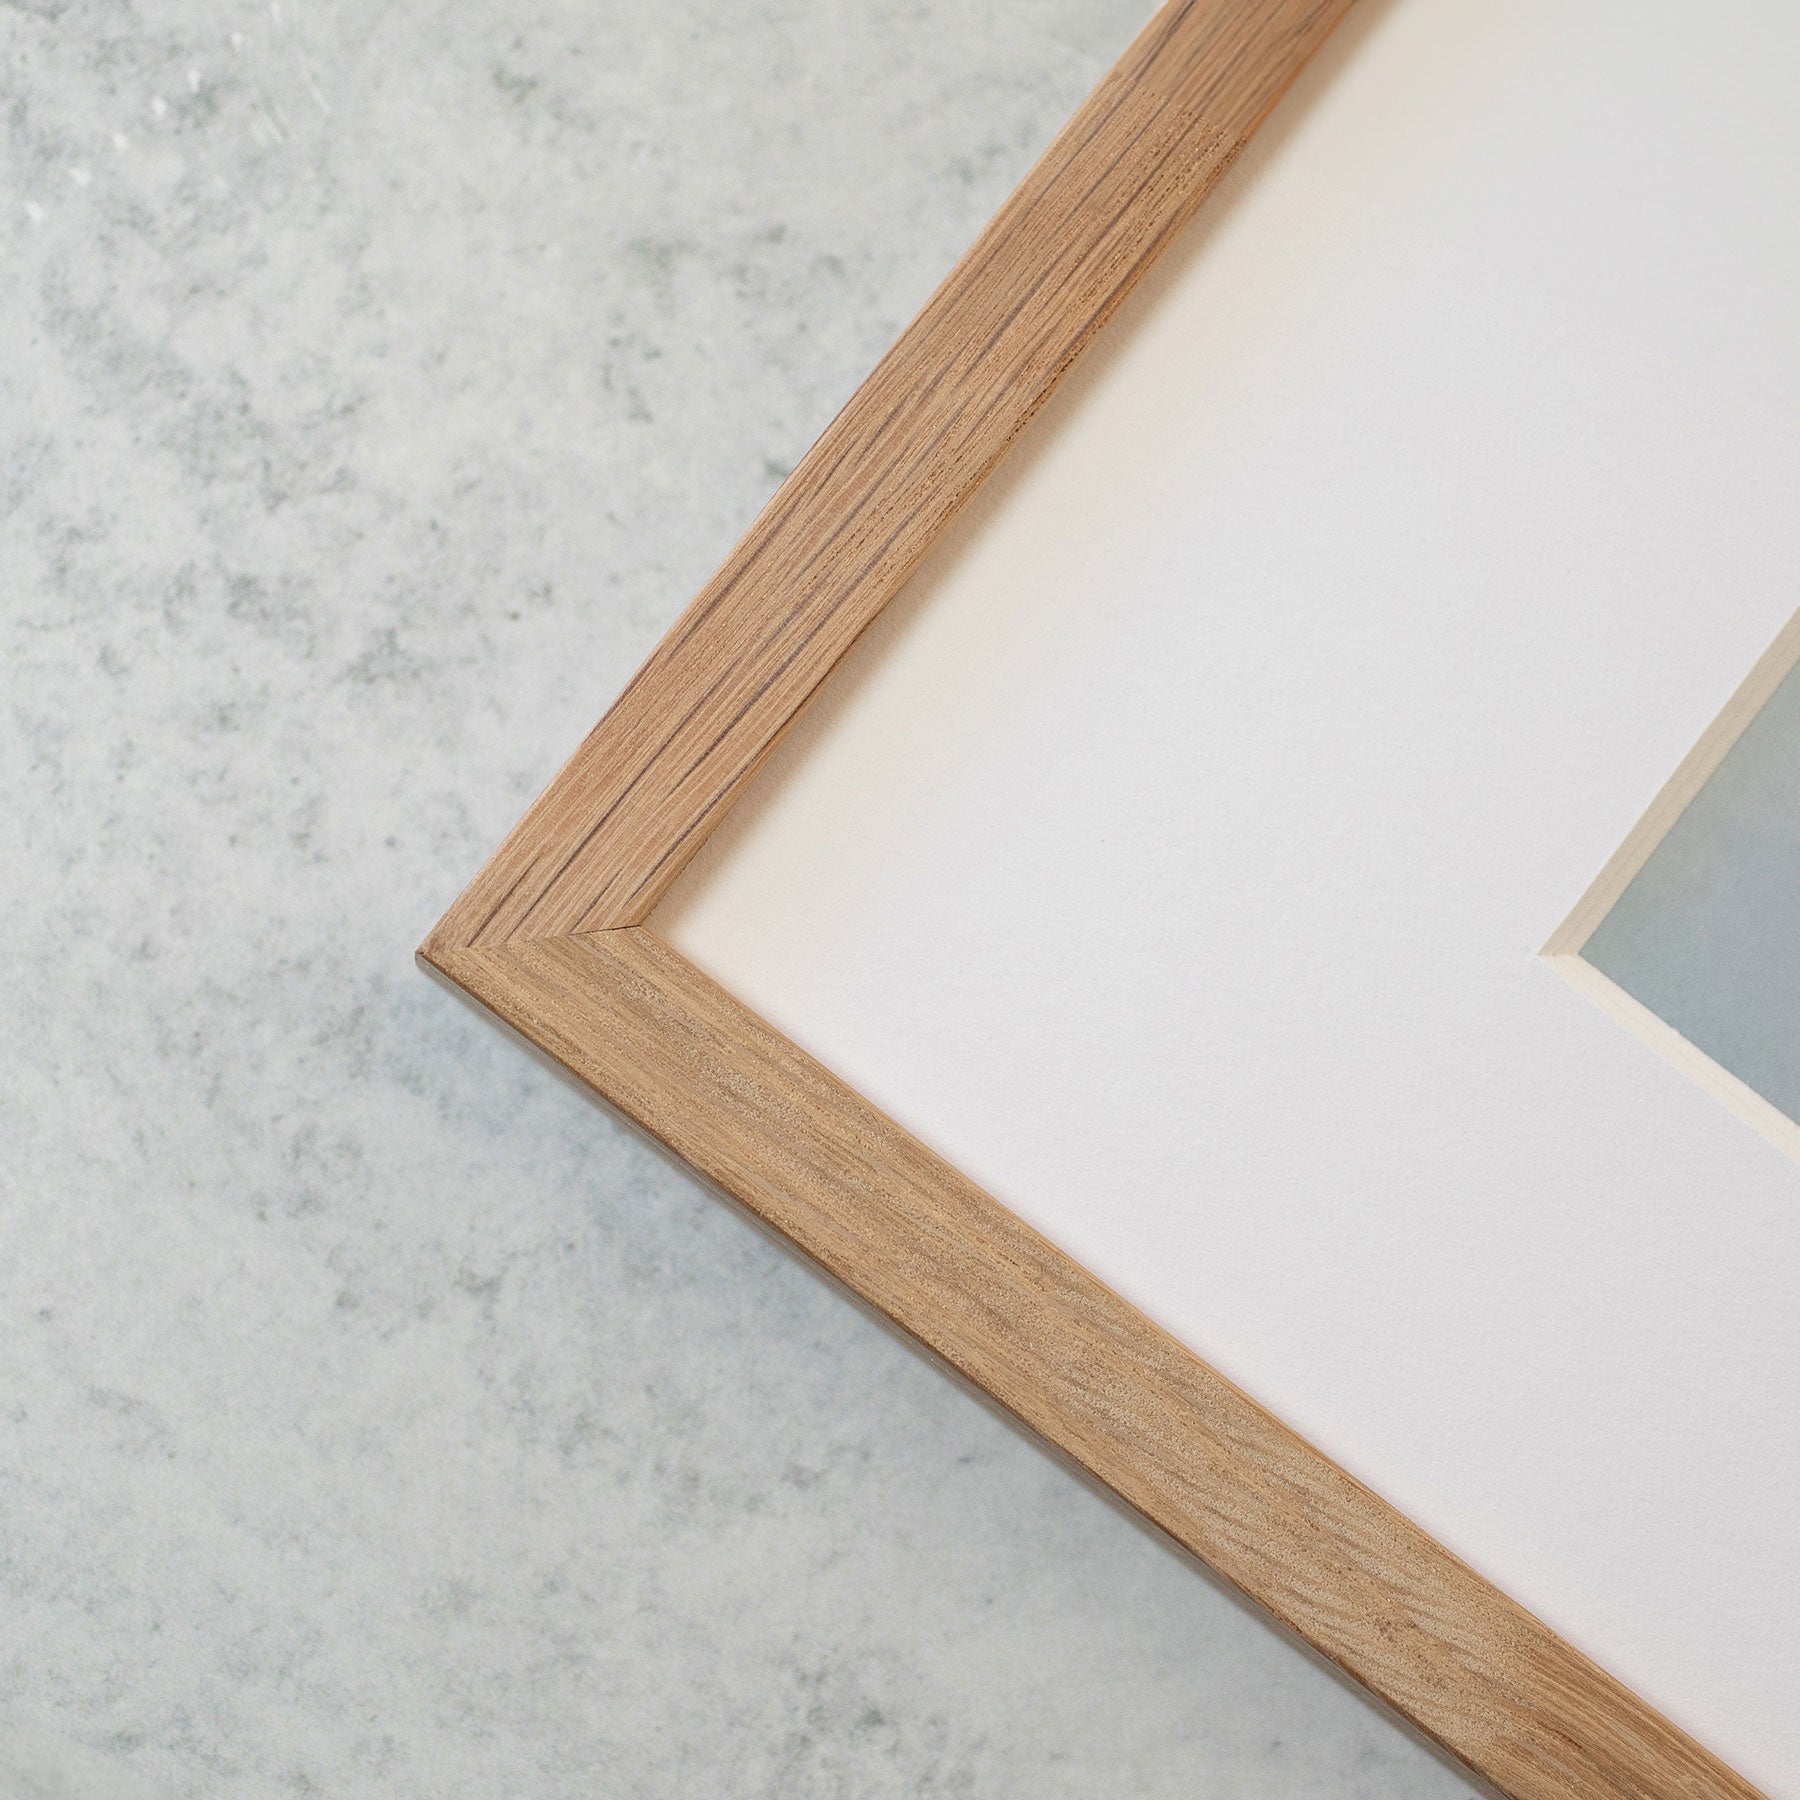 Close-up of a corner of a wooden picture frame on a marble surface, showing detail of the frame&#39;s texture and the clean, white archival photographic paper border inside it featuring Offley Green&#39;s Mint Green Botanical Print, &#39;Aloe Vera Spikes&#39;.